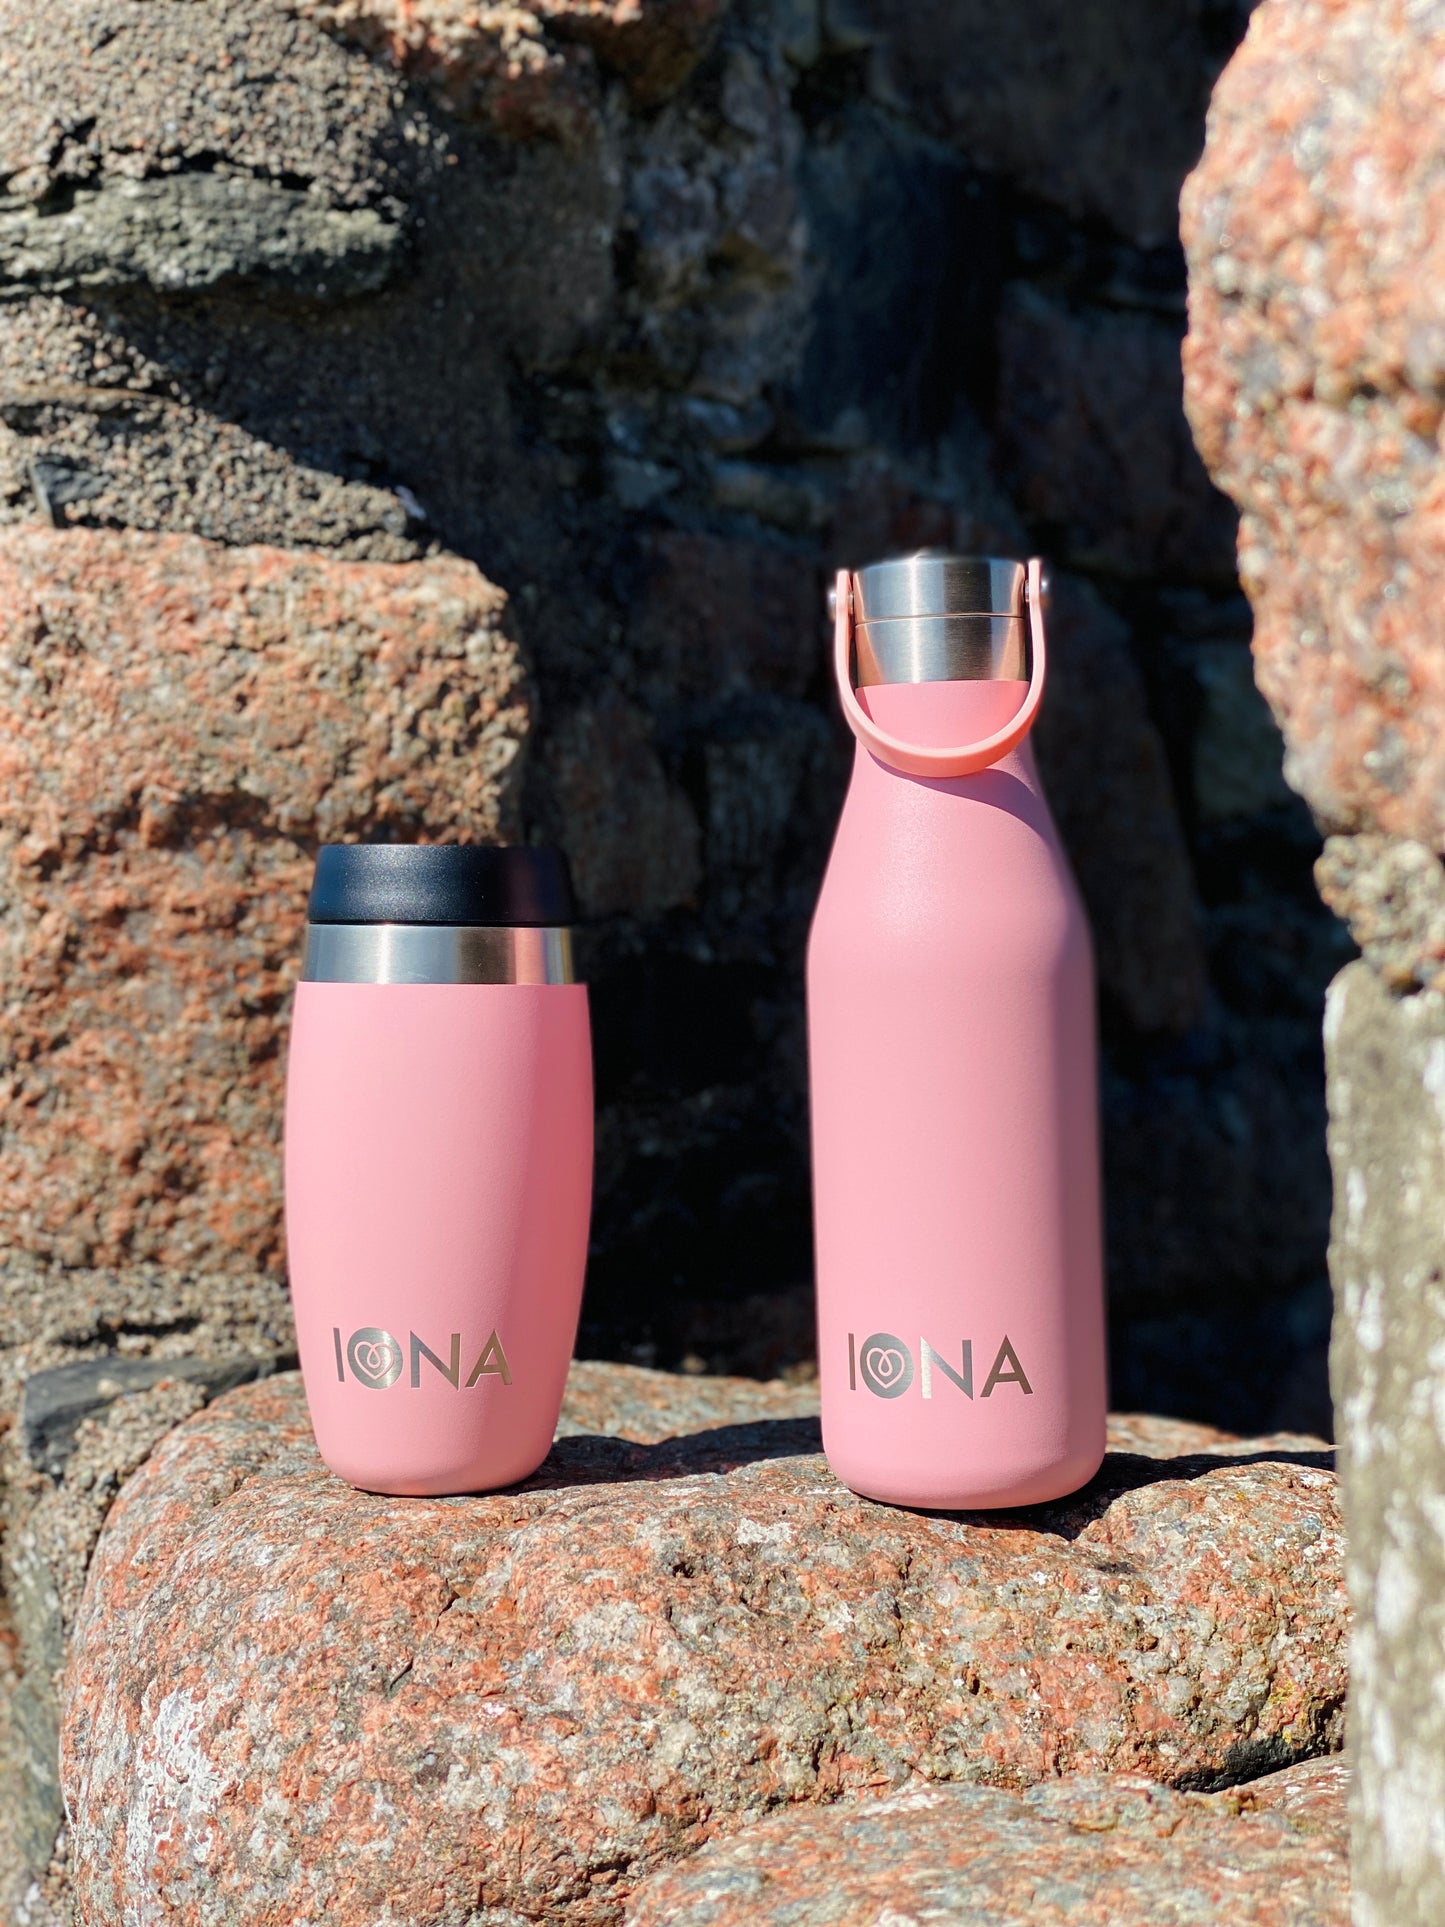 Iona Water Bottle - Pink